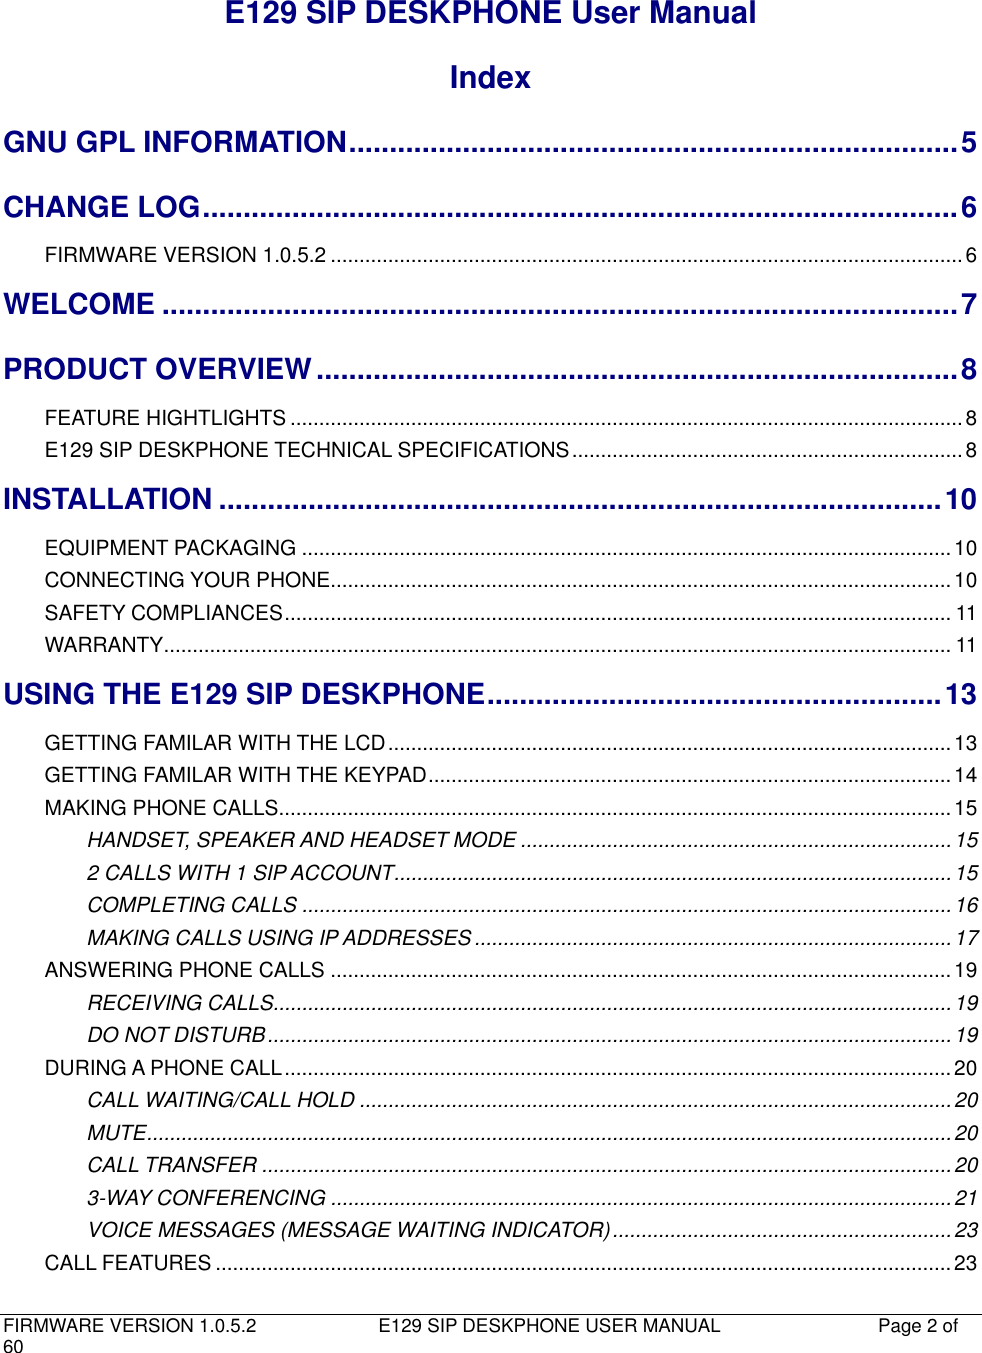   FIRMWARE VERSION 1.0.5.2                          E129 SIP DESKPHONE USER MANUAL           Page 2 of 60                                   E129 SIP DESKPHONE User Manual Index GNU GPL INFORMATION ........................................................................... 5 CHANGE LOG ............................................................................................. 6 FIRMWARE VERSION 1.0.5.2 .............................................................................................................. 6 WELCOME .................................................................................................. 7 PRODUCT OVERVIEW ............................................................................... 8 FEATURE HIGHTLIGHTS ..................................................................................................................... 8 E129 SIP DESKPHONE TECHNICAL SPECIFICATIONS .................................................................... 8 INSTALLATION ......................................................................................... 10 EQUIPMENT PACKAGING ................................................................................................................. 10 CONNECTING YOUR PHONE ............................................................................................................ 10 SAFETY COMPLIANCES .................................................................................................................... 11 WARRANTY ......................................................................................................................................... 11 USING THE E129 SIP DESKPHONE ........................................................ 13 GETTING FAMILAR WITH THE LCD .................................................................................................. 13 GETTING FAMILAR WITH THE KEYPAD ........................................................................................... 14 MAKING PHONE CALLS..................................................................................................................... 15 HANDSET, SPEAKER AND HEADSET MODE ........................................................................... 15 2 CALLS WITH 1 SIP ACCOUNT ................................................................................................. 15 COMPLETING CALLS ................................................................................................................. 16 MAKING CALLS USING IP ADDRESSES ................................................................................... 17 ANSWERING PHONE CALLS ............................................................................................................ 19 RECEIVING CALLS...................................................................................................................... 19 DO NOT DISTURB ....................................................................................................................... 19 DURING A PHONE CALL .................................................................................................................... 20 CALL WAITING/CALL HOLD ....................................................................................................... 20 MUTE ............................................................................................................................................ 20 CALL TRANSFER ........................................................................................................................ 20 3-WAY CONFERENCING ............................................................................................................ 21 VOICE MESSAGES (MESSAGE WAITING INDICATOR) ........................................................... 23 CALL FEATURES ................................................................................................................................ 23 